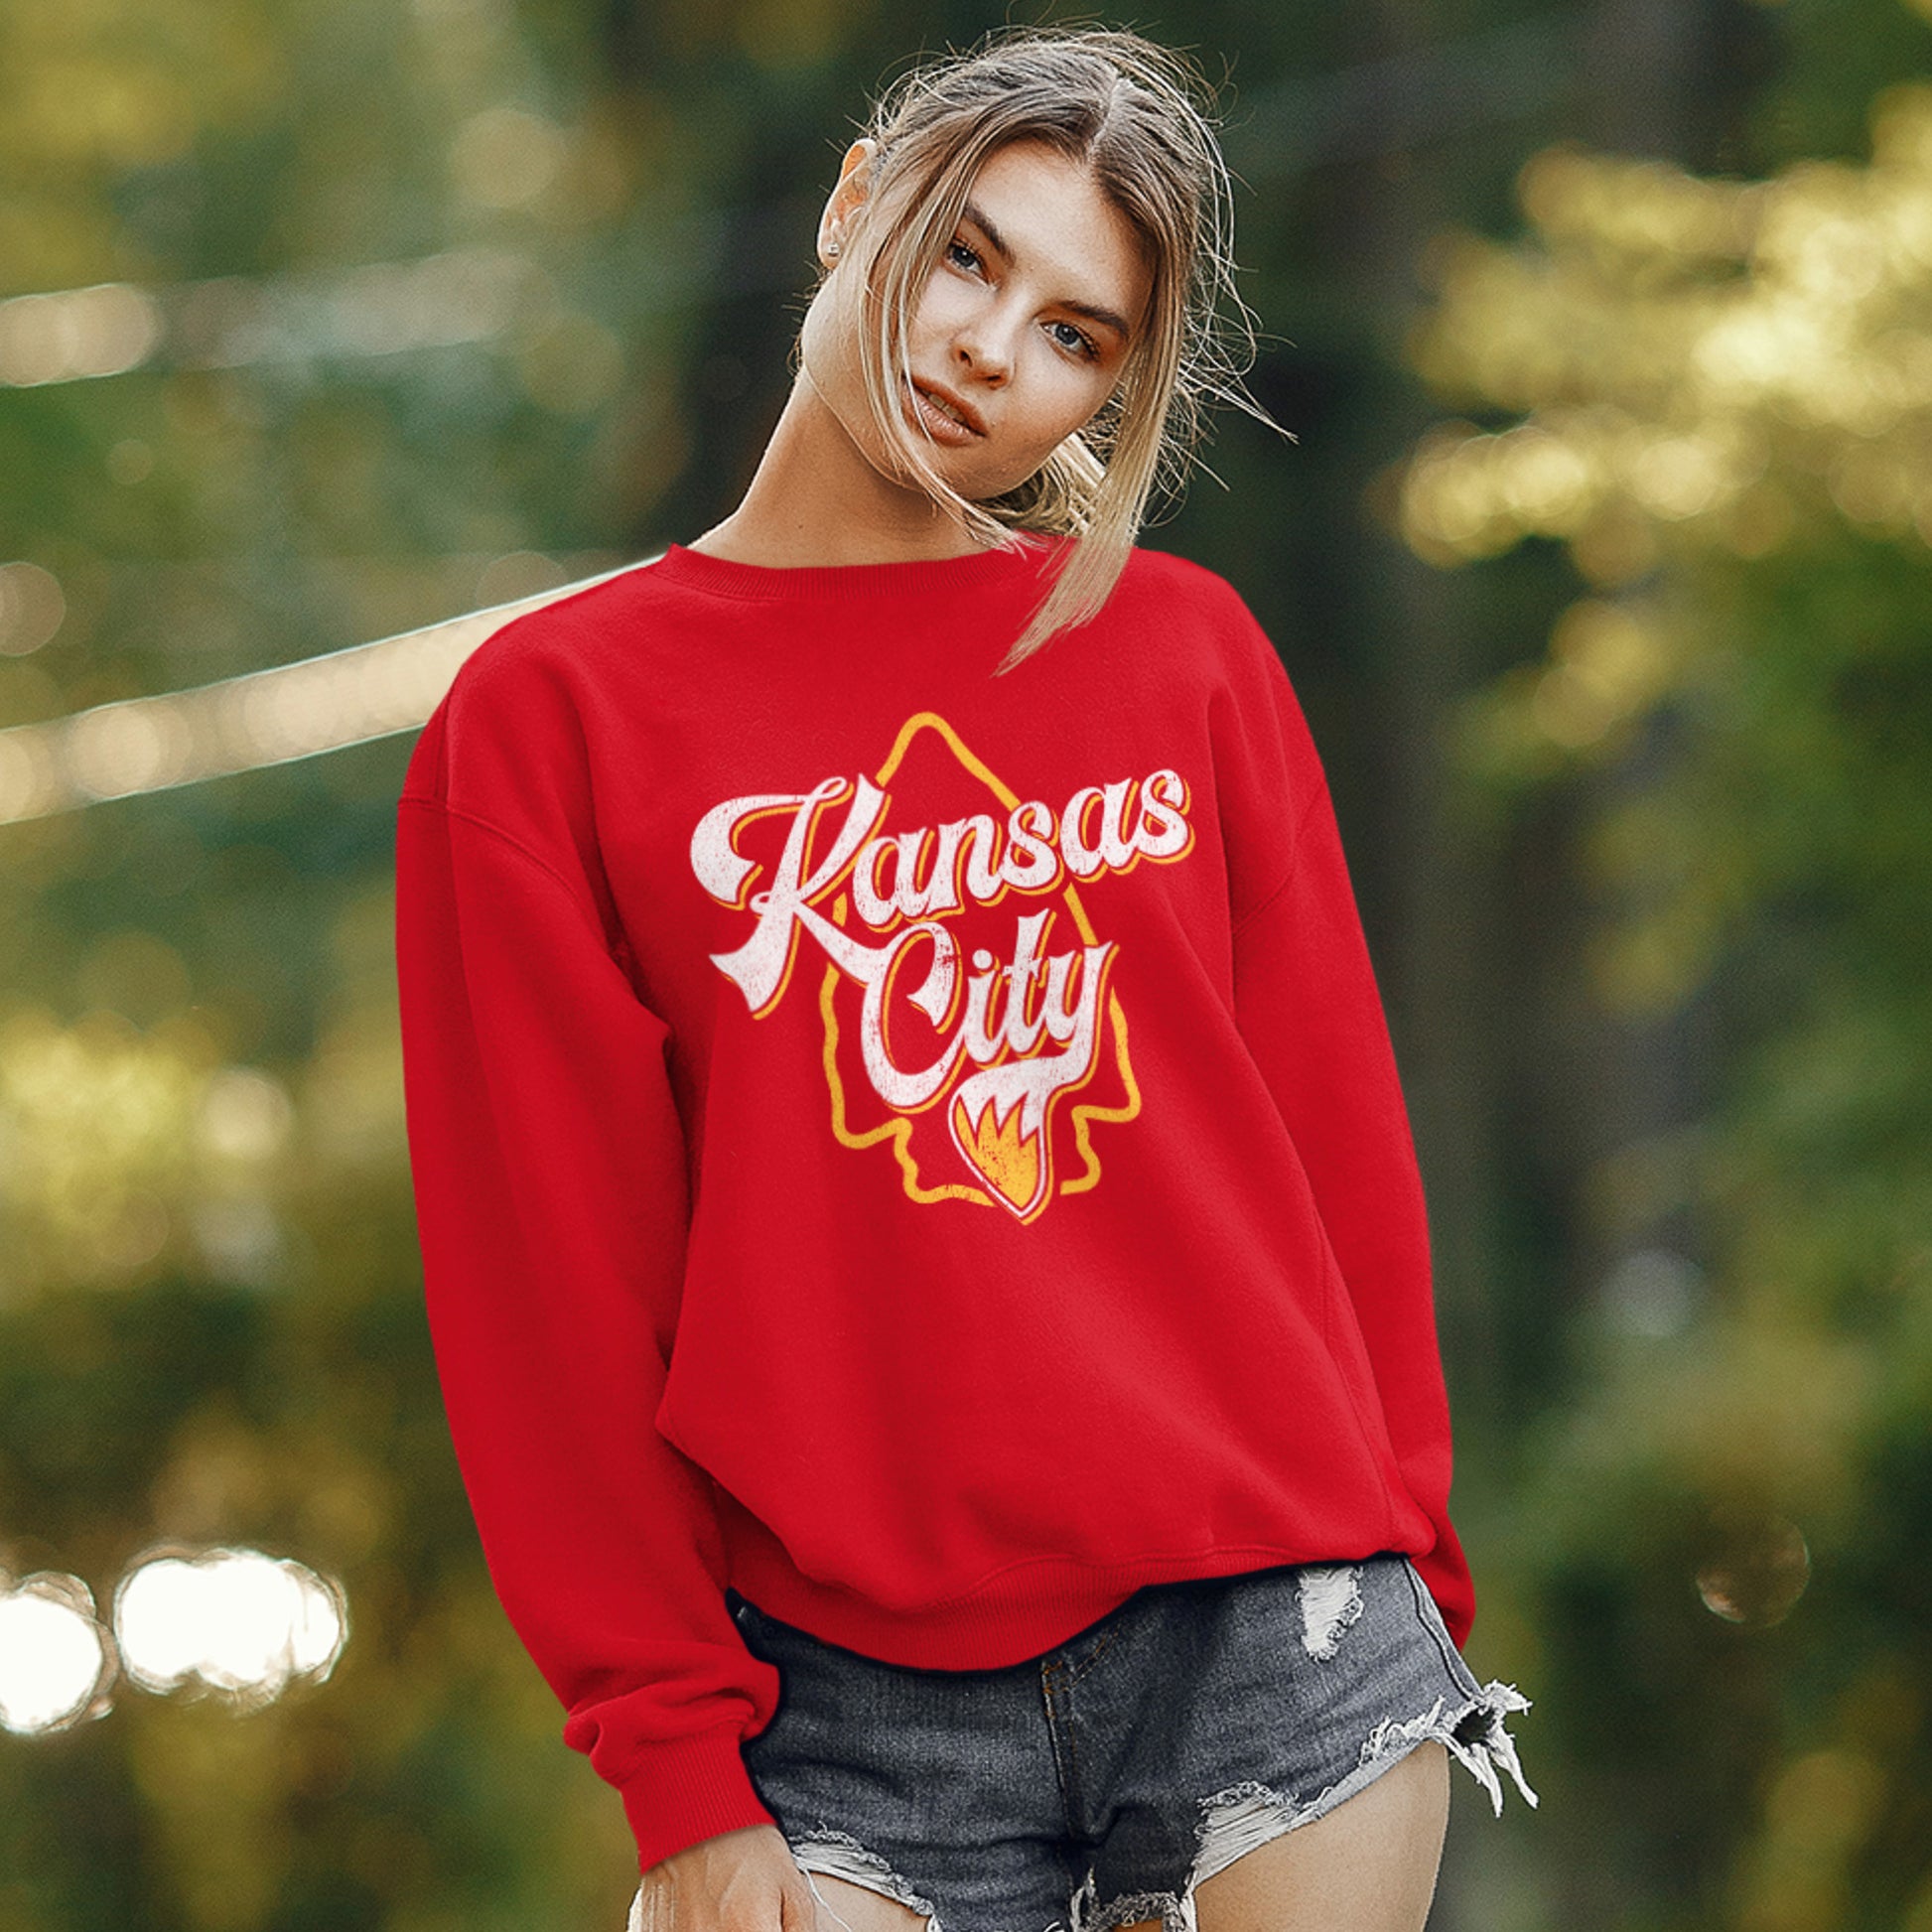 KC Swag Kansas City Chiefs Distressed White & Gold Wolftail KC on a Red Crewneck Sweatshirt worn by female wearing ripped jean-shorts standing in a public park